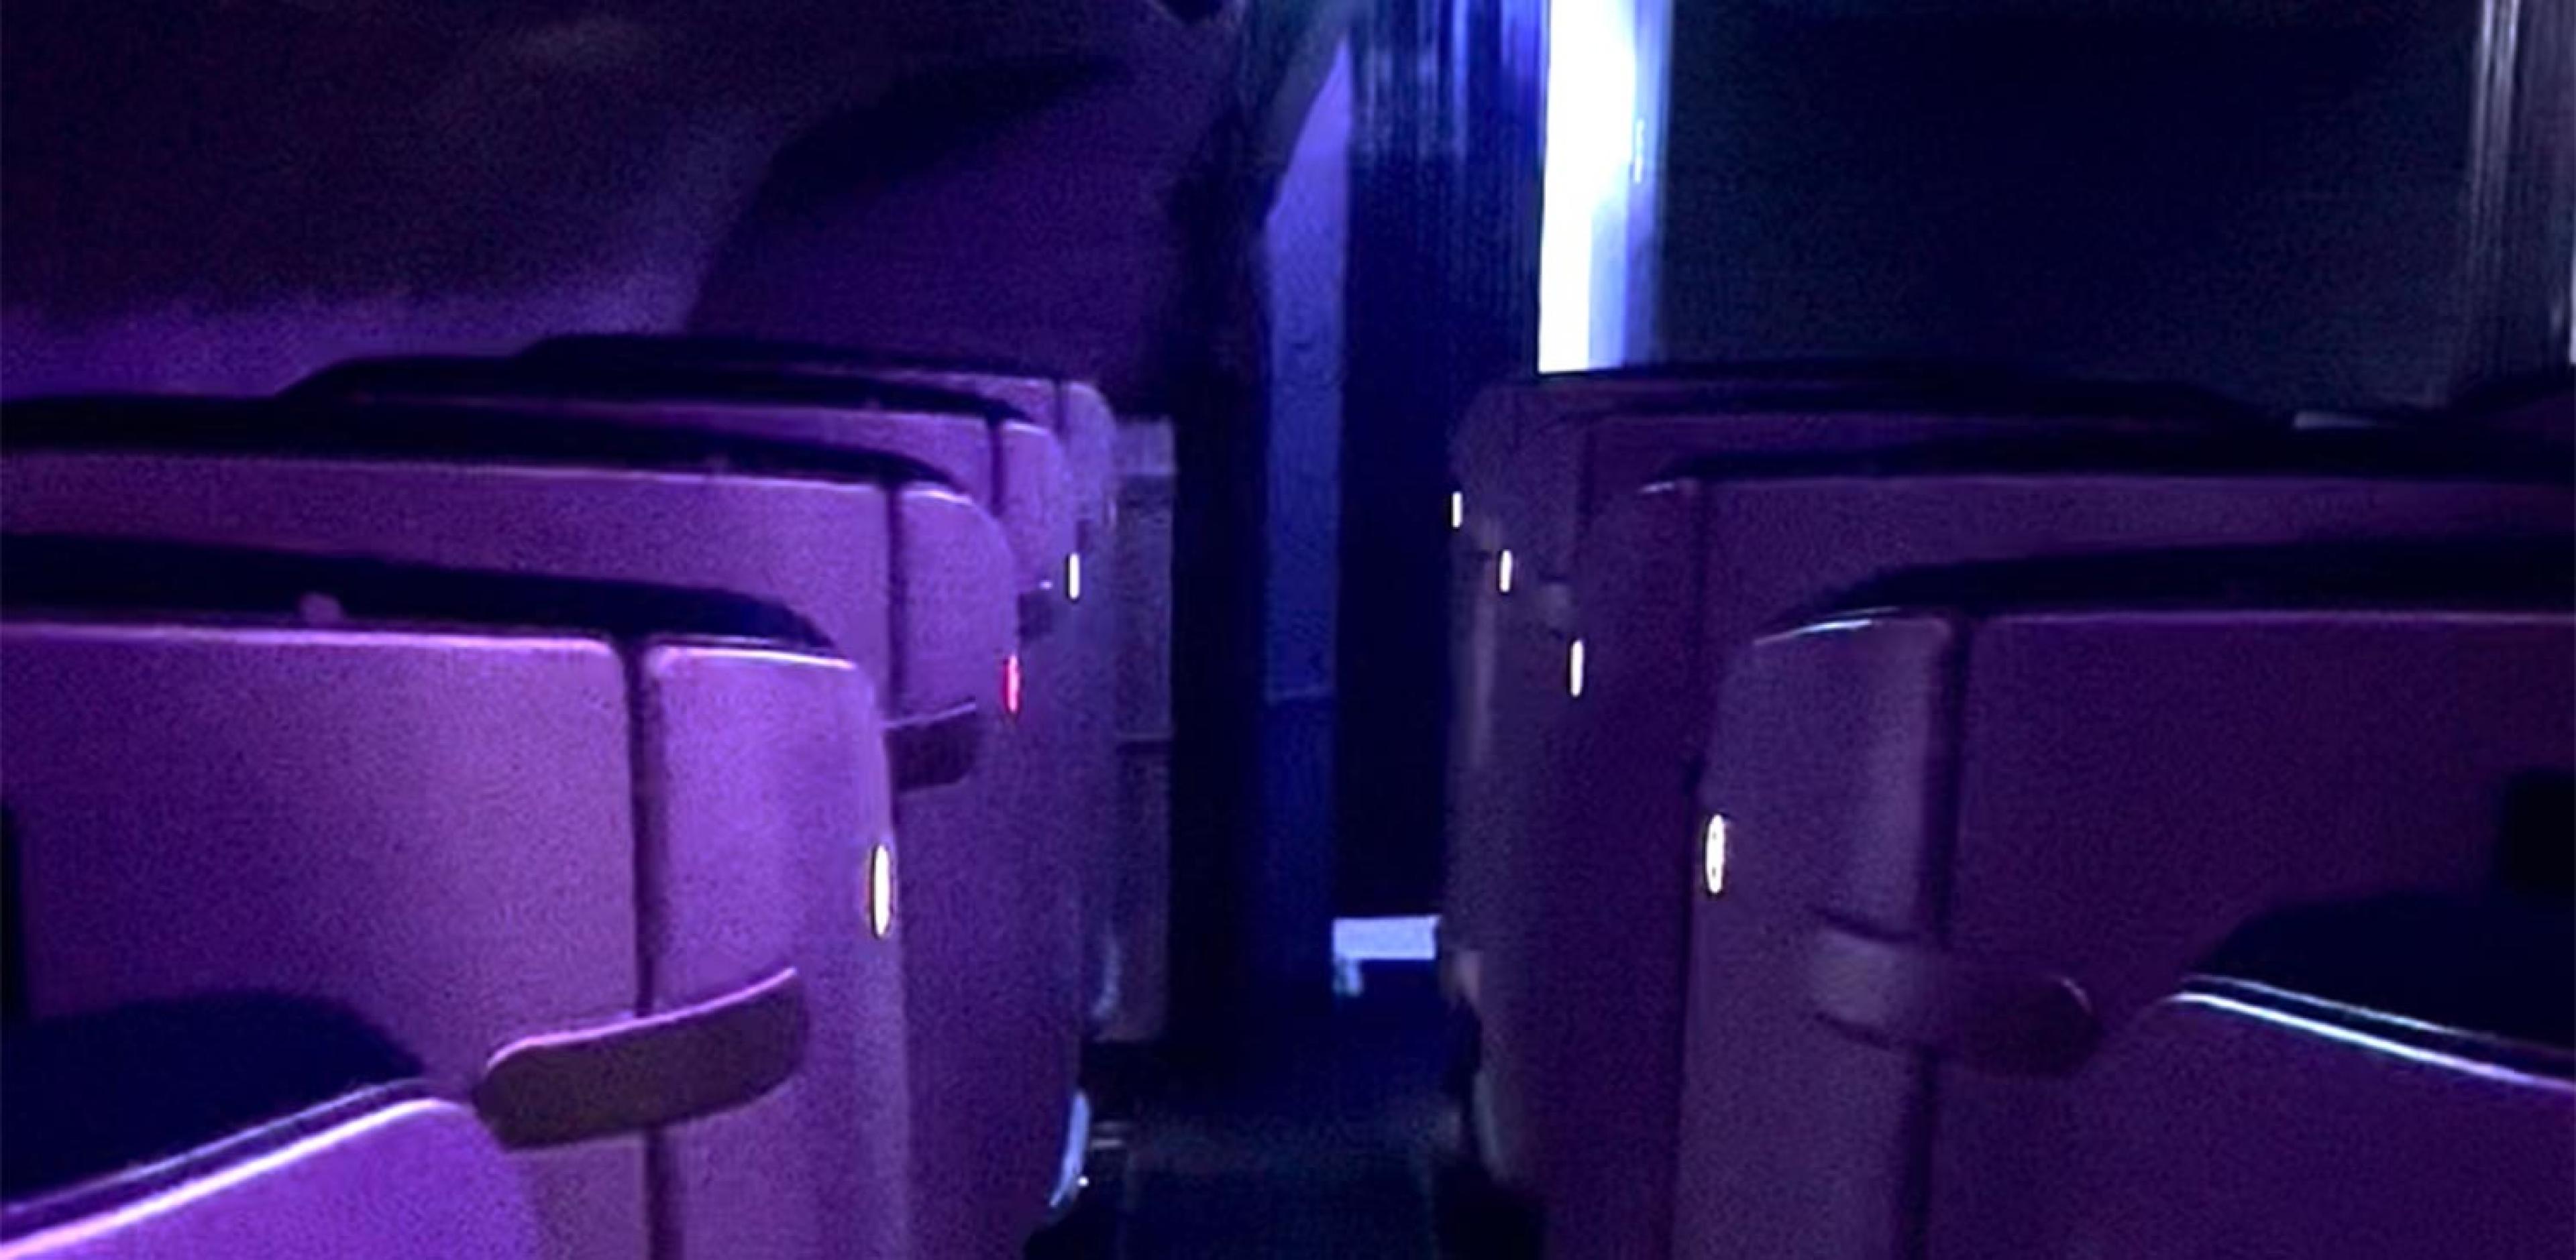 view of business class seating at night on a plane